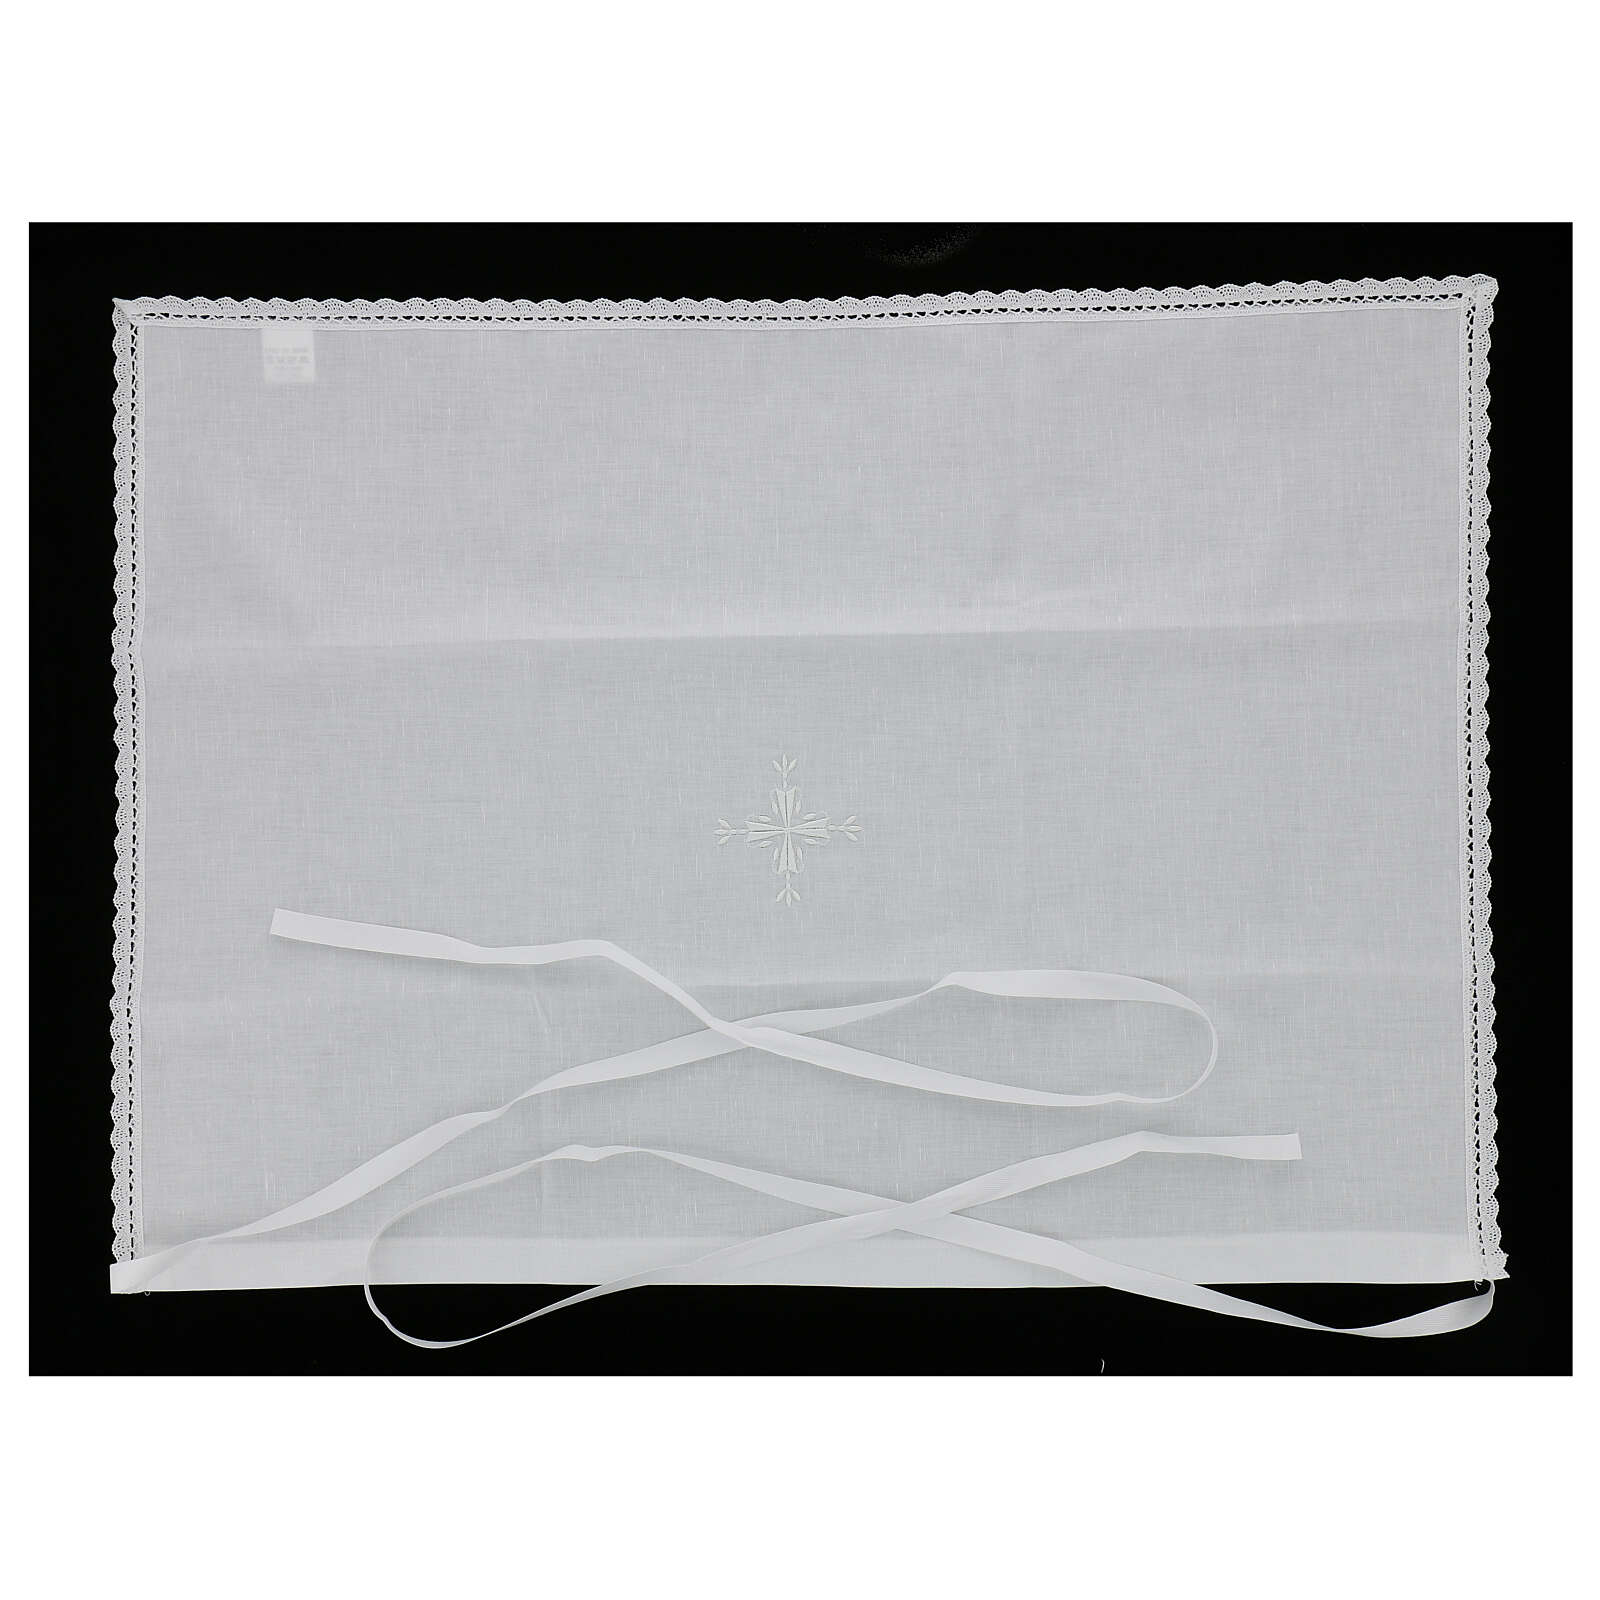 Altar linens, set of 5 in linen and cotton with amice | online sales on ...